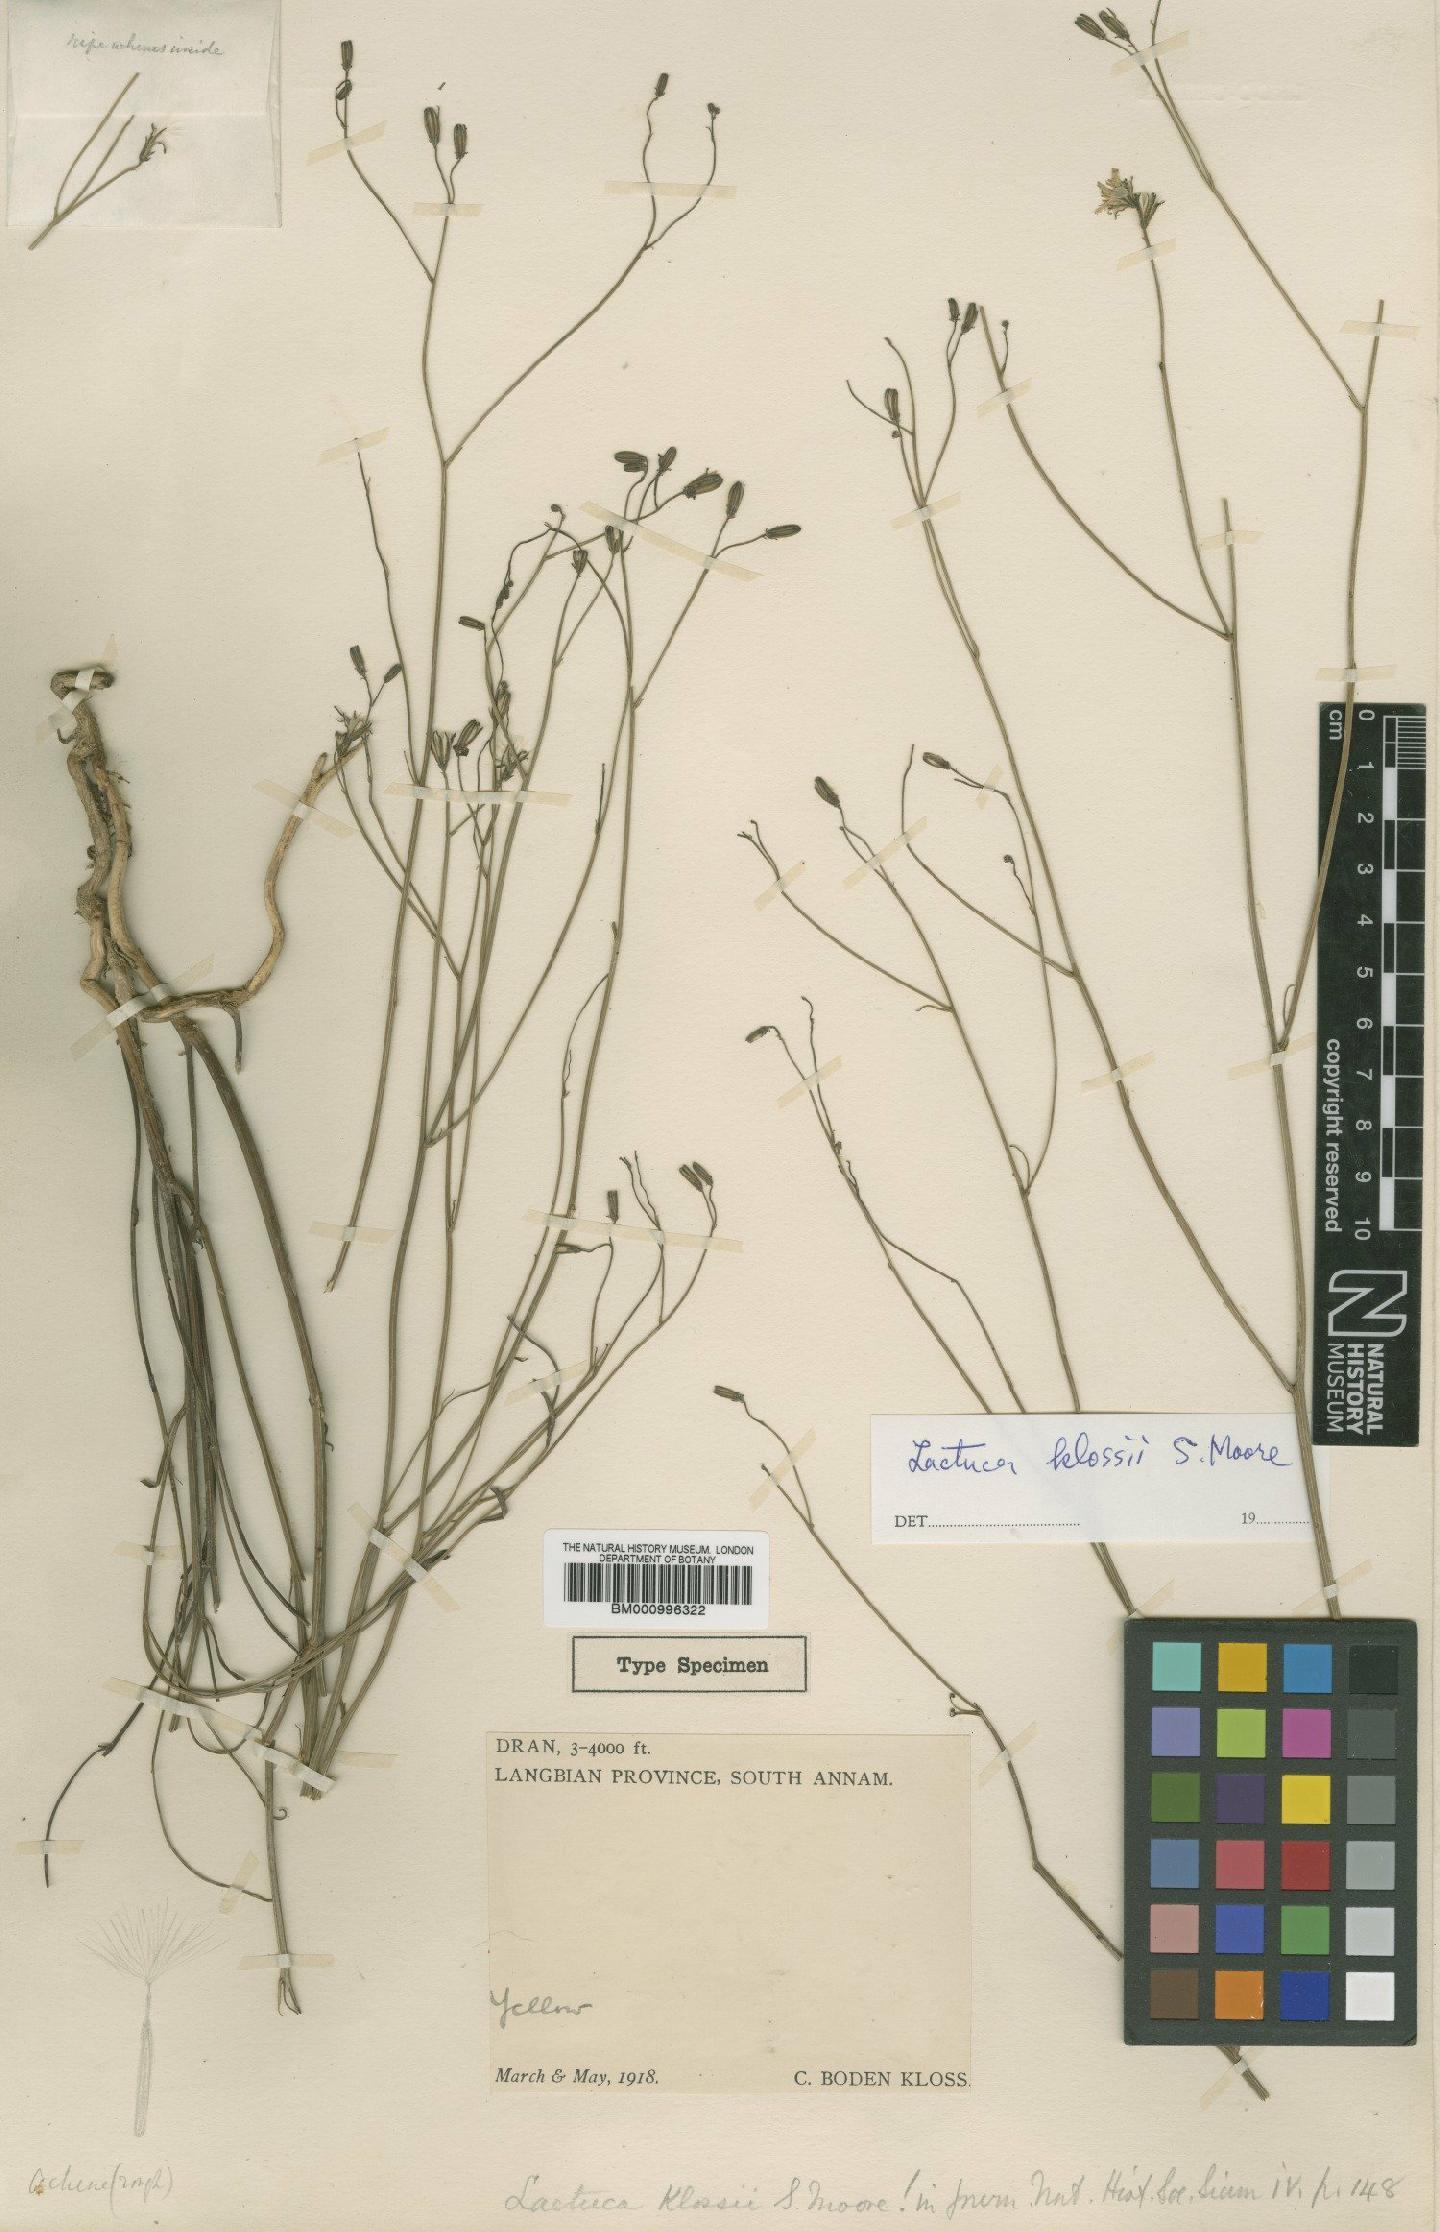 To NHMUK collection (Lactuca klossii S.Moore; Type; NHMUK:ecatalogue:481808)